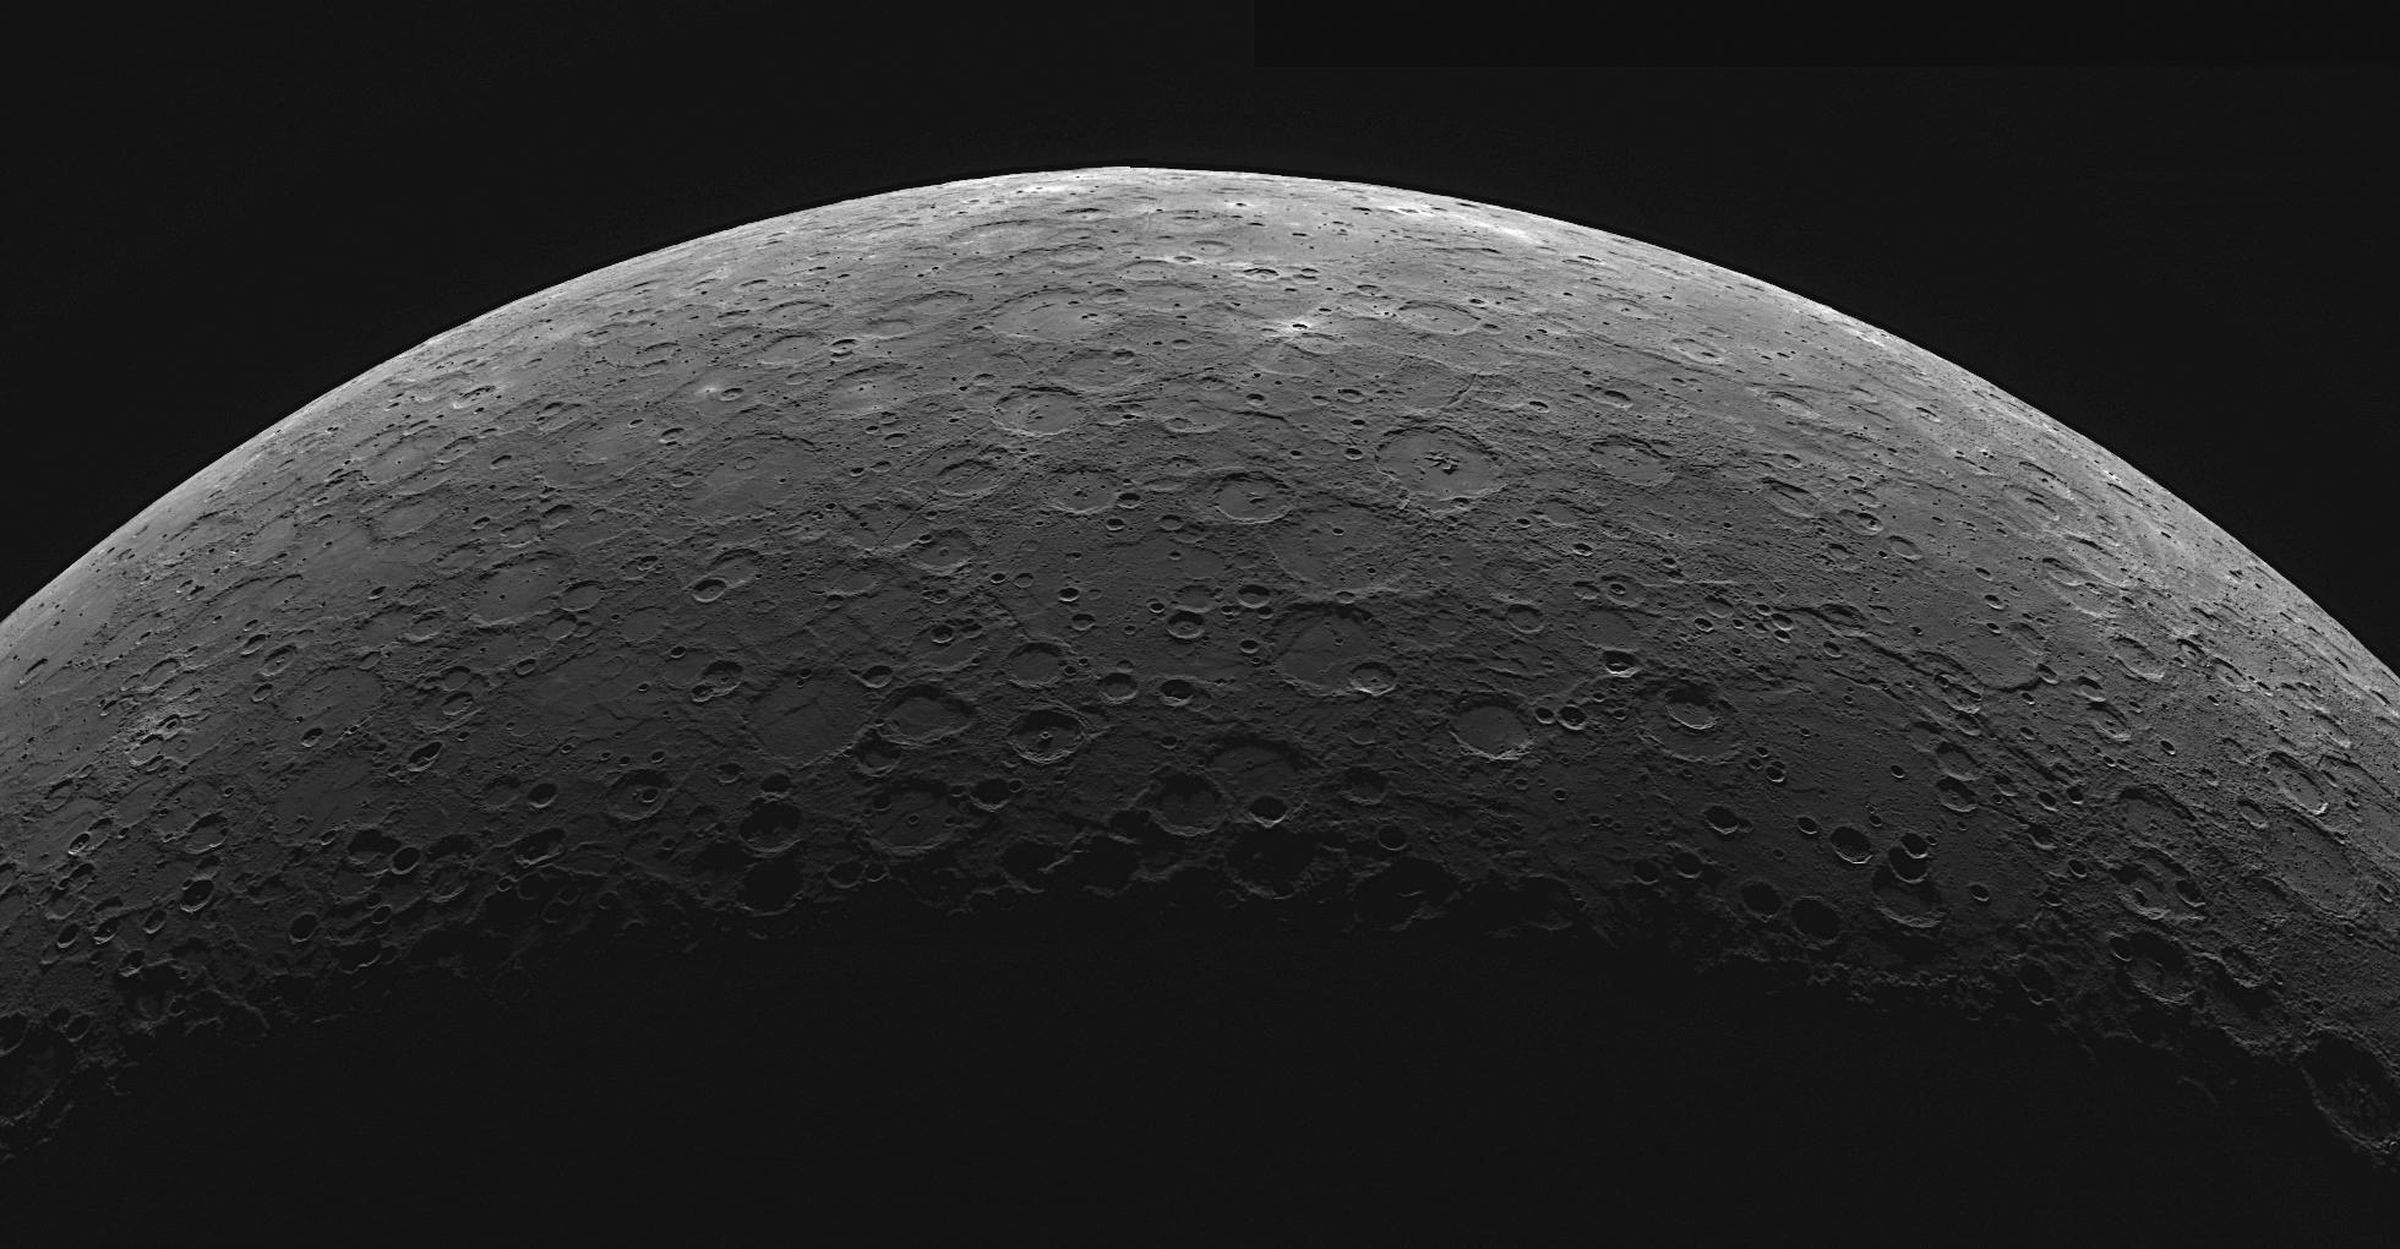 Mercury as seen by the MESSENGER spacecraft.